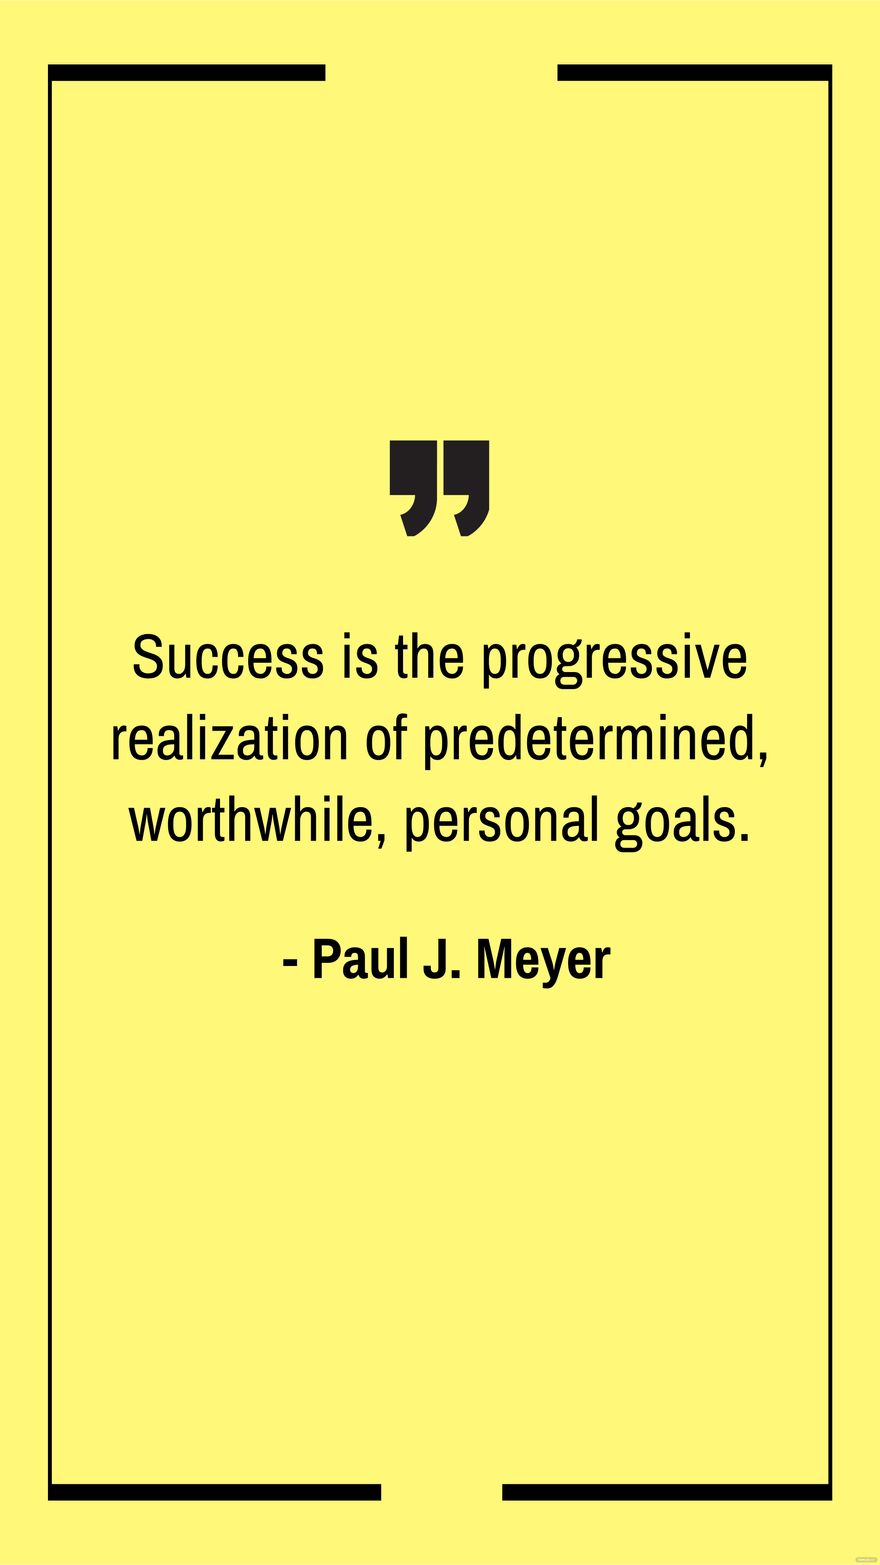 Free Paul J. Meyer - Success is the progressive realization of predetermined, worthwhile, personal goals.